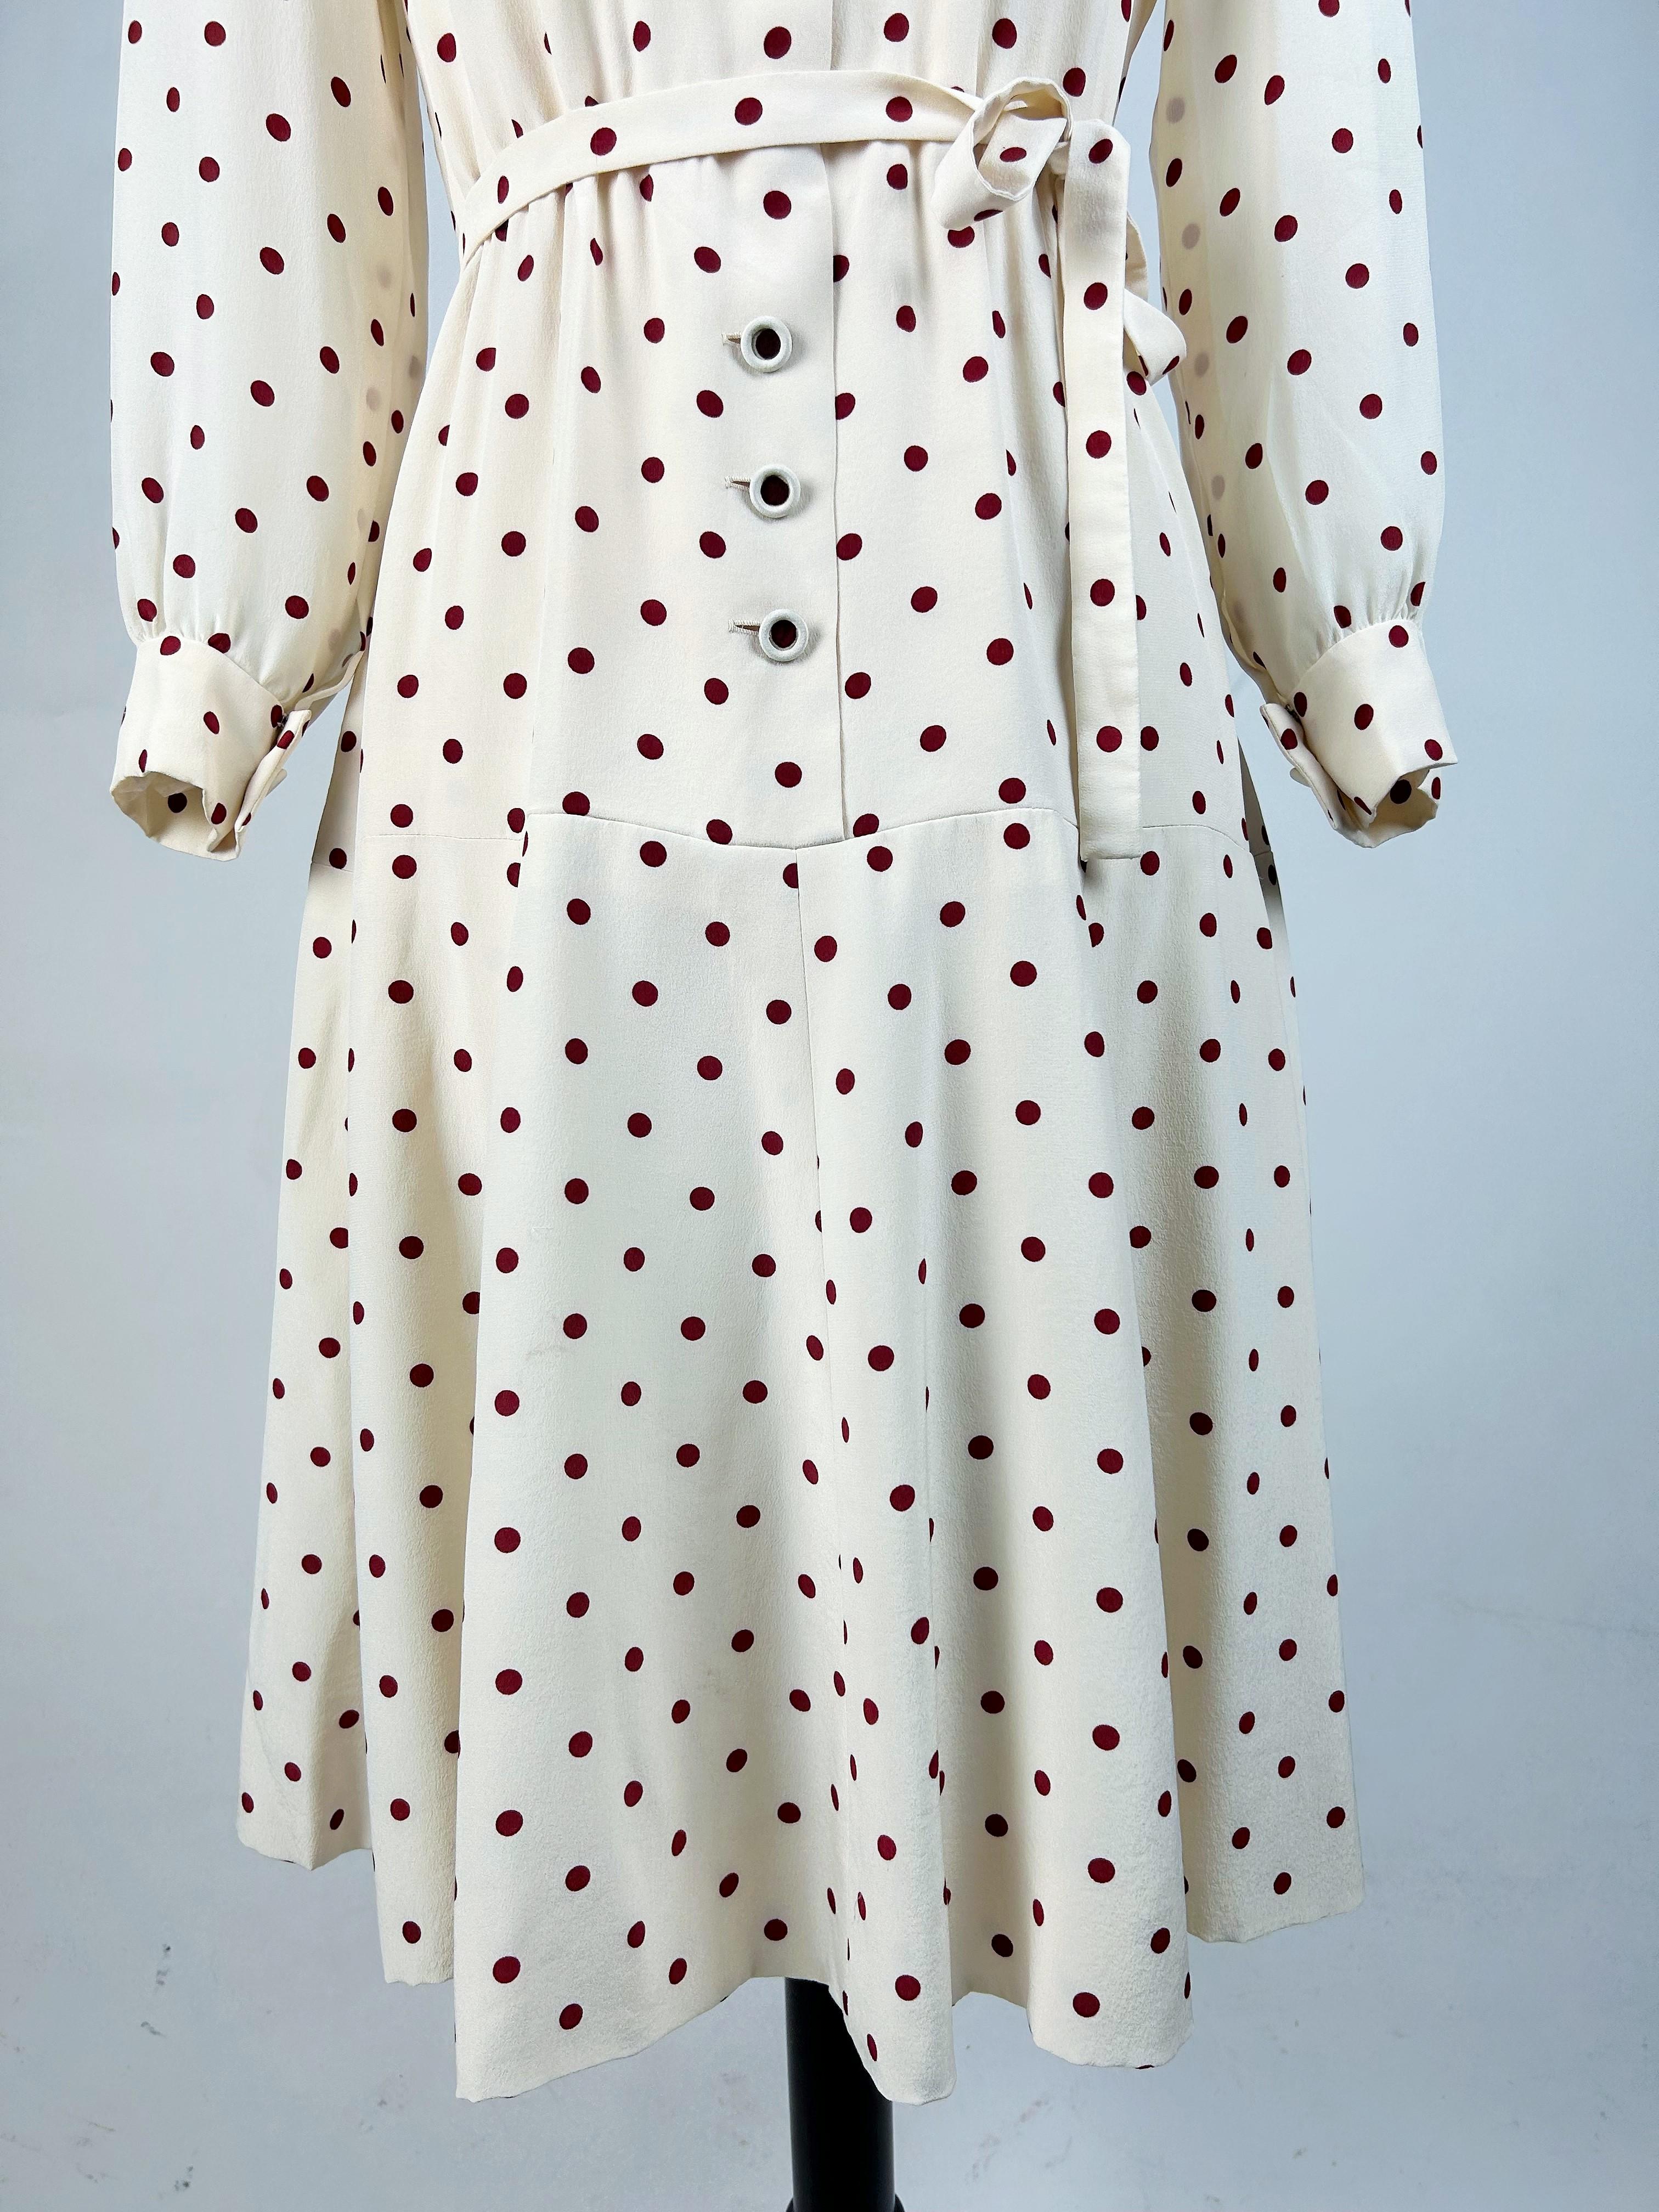 A Polka Dots crepe cocktail dress by Chanel Haute Couture numbered 59644 C. 1975 For Sale 5